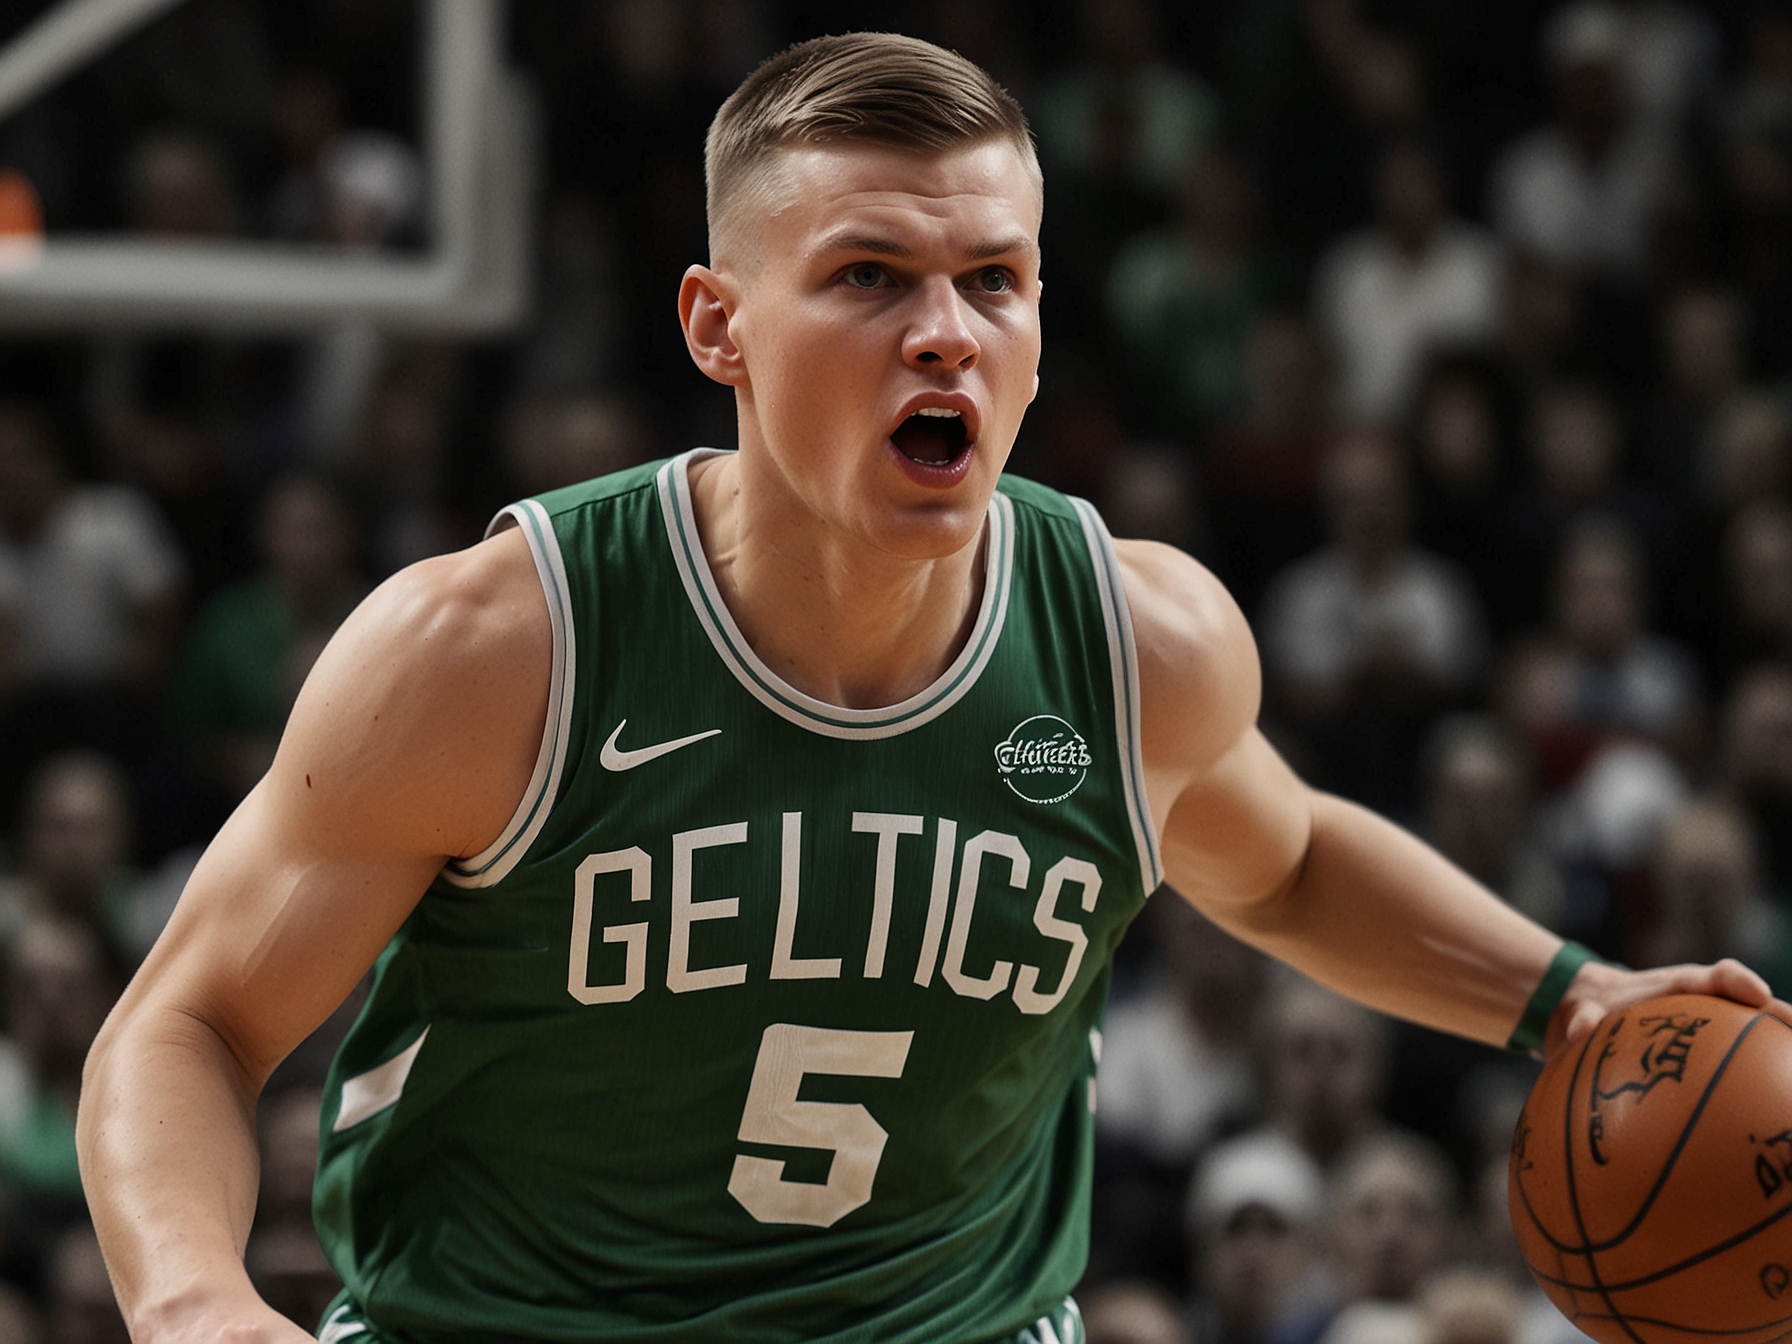 Kristaps Porzingis on the court, showcasing his agility and basketball skills during an NBA game, symbolizing his crucial role in the Boston Celtics' season before his unfortunate injury.